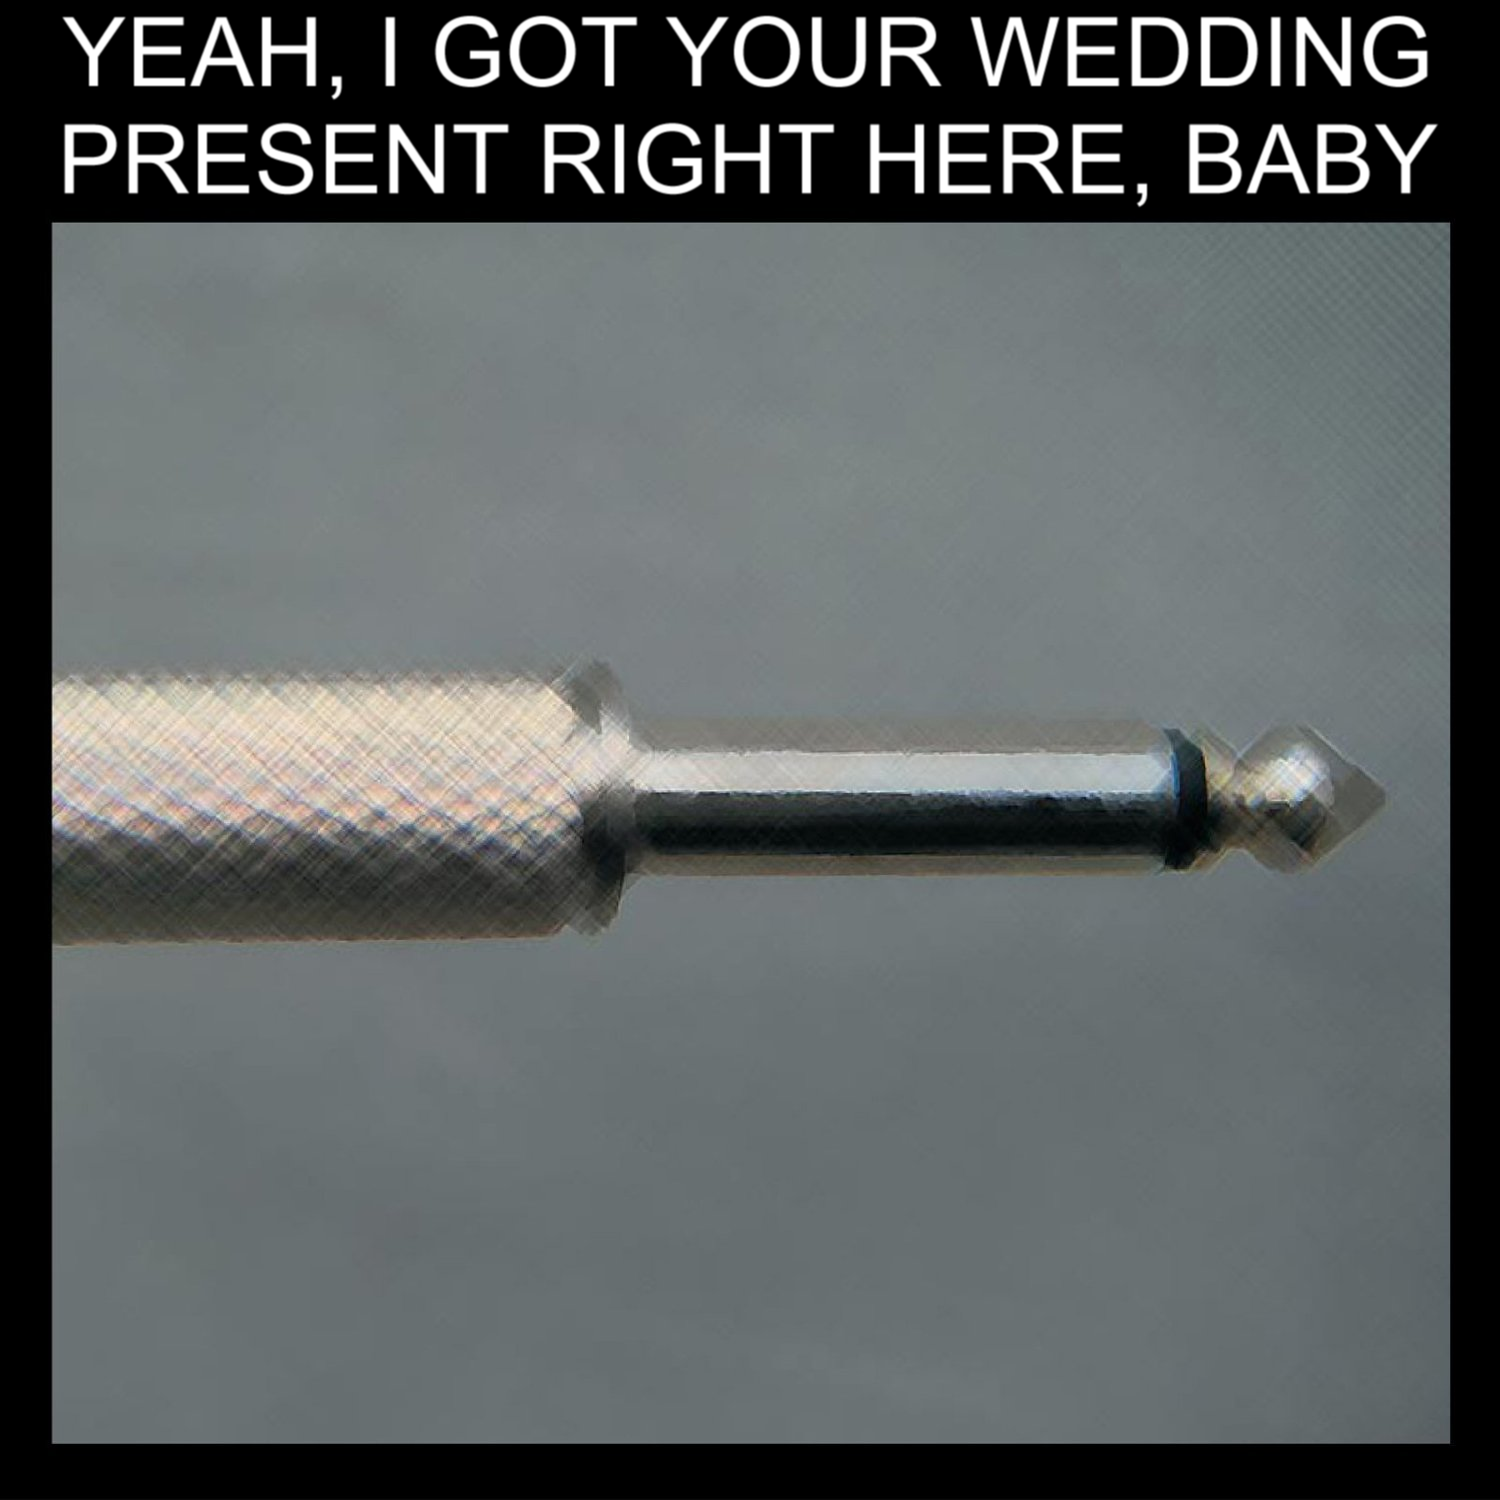 Album cover parody of Plugged In: An Evening At Shepherds Bush by Wedding Present